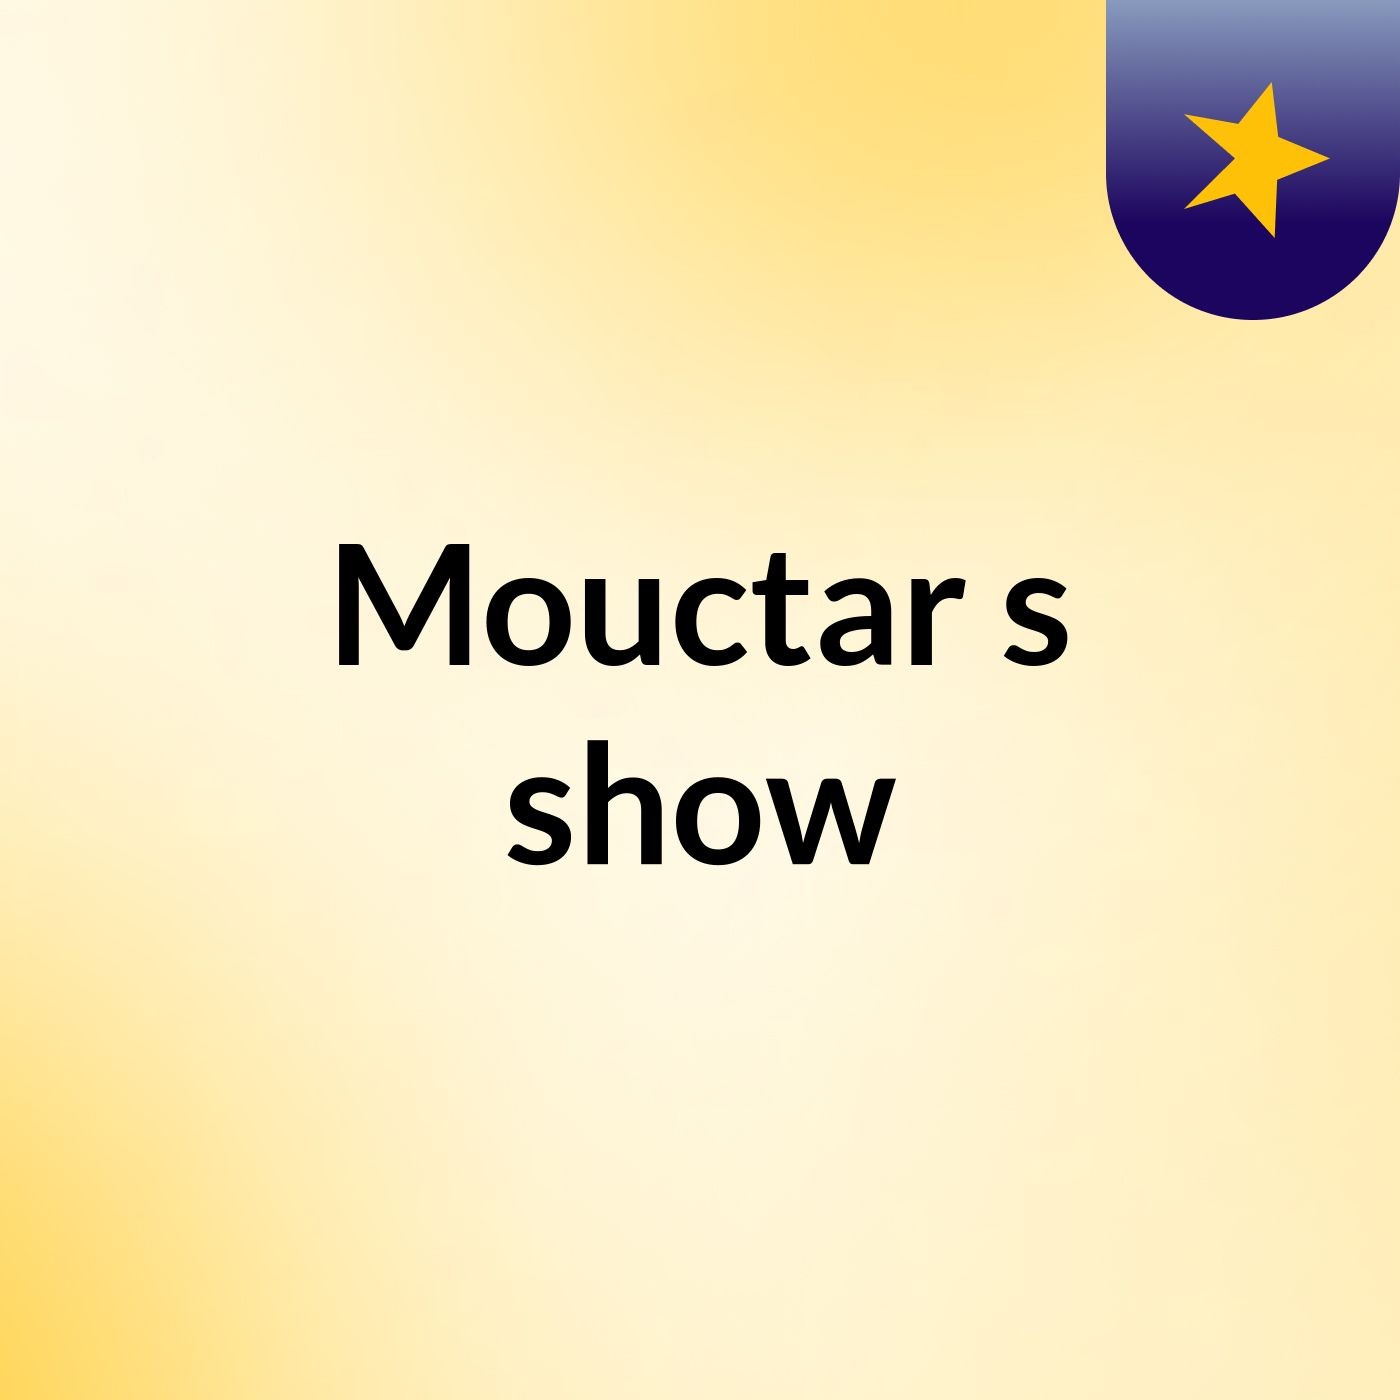 Mouctar's show